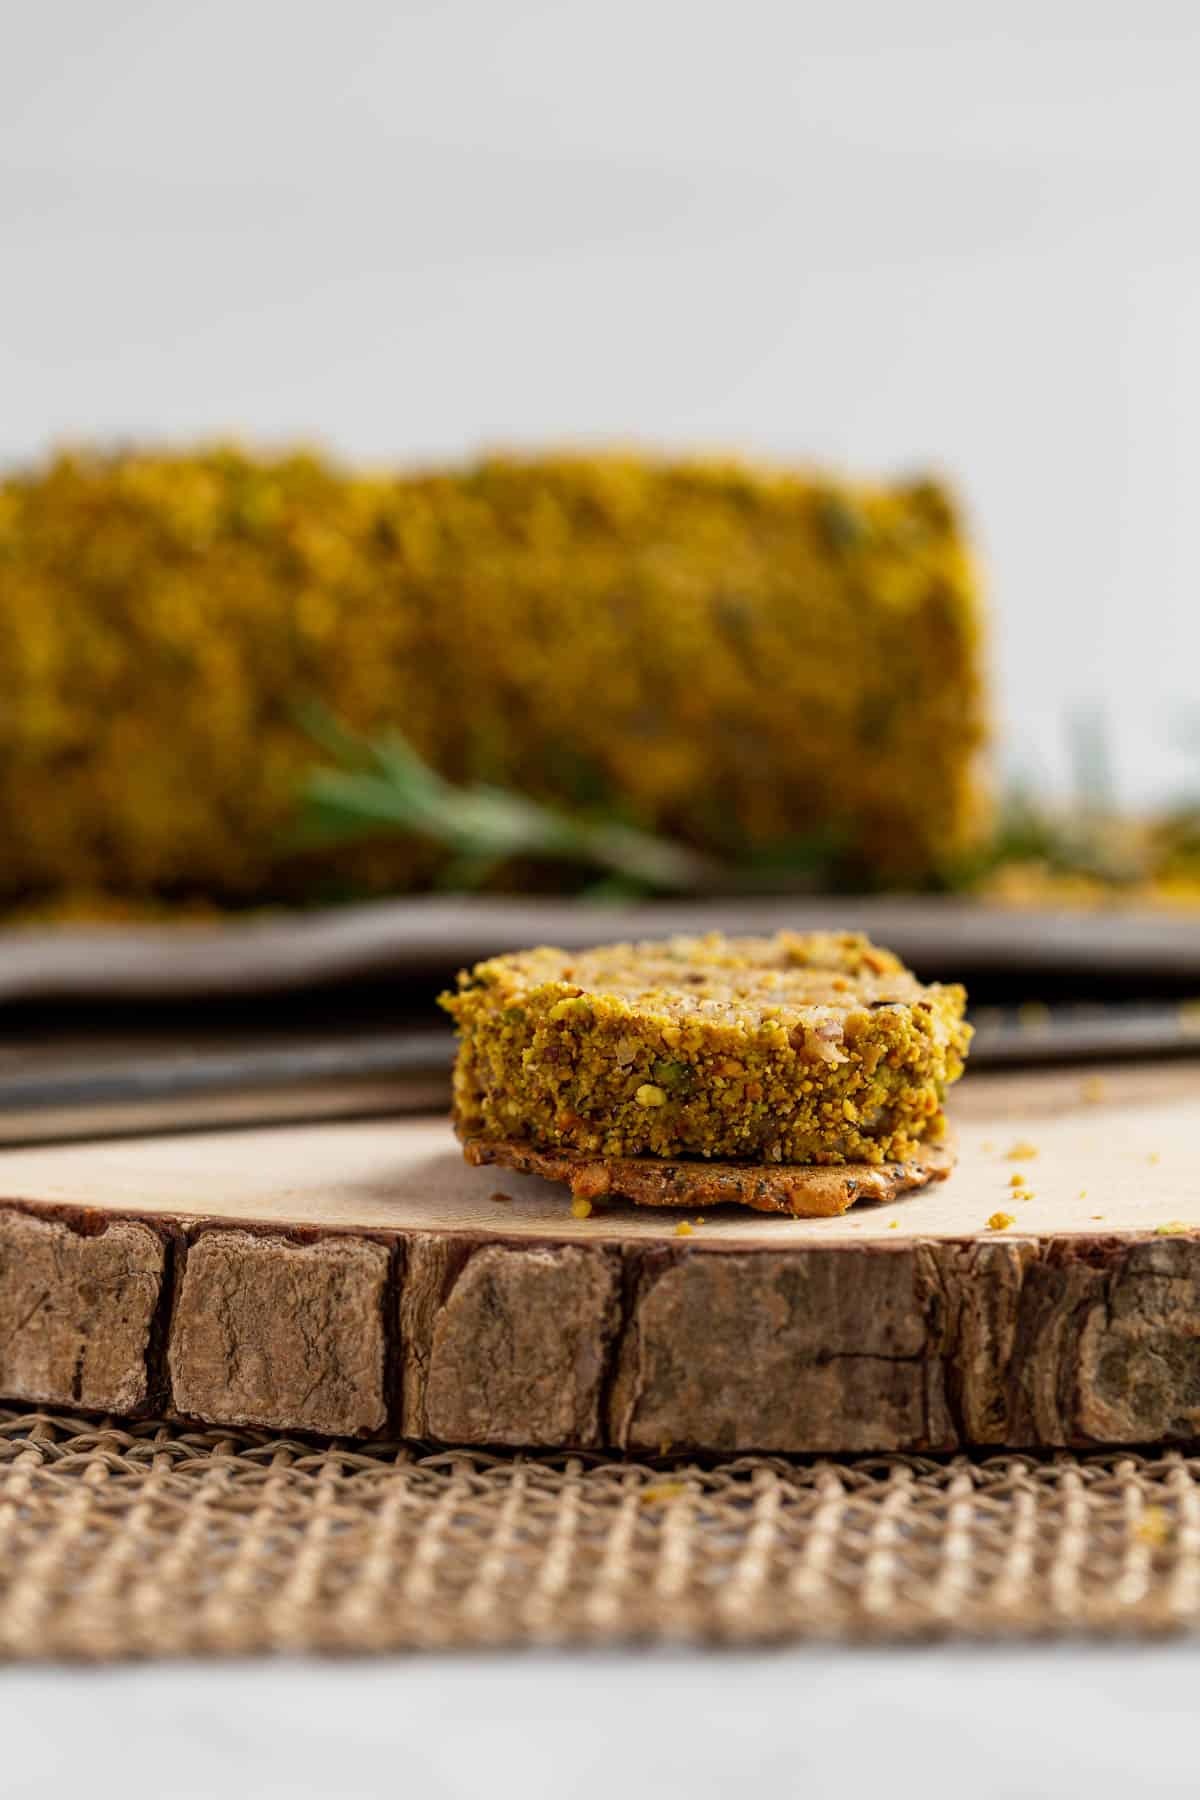 A slice of Lemon Rosemary Vegan Cheese Log on a cracker in front of the cheese log.